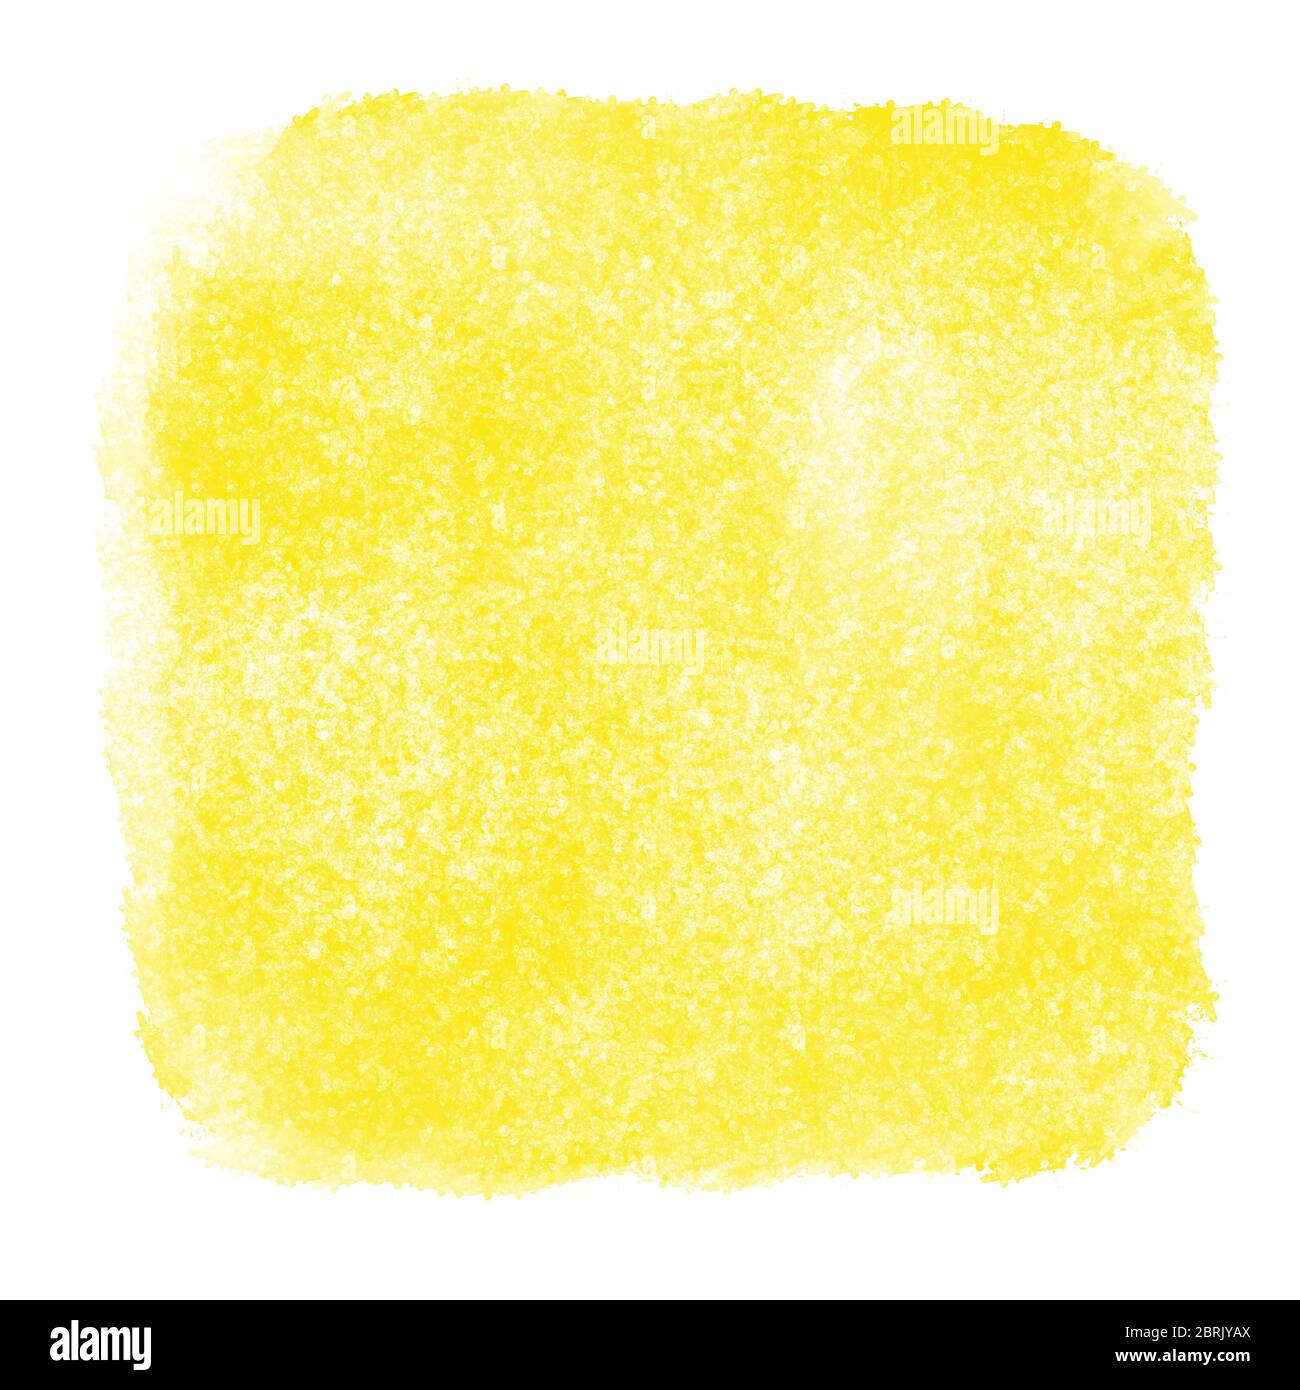 Yellow watercolor textured backdrop wallpaper background. Hand drawing square watercolor paint on paper. Rugged grunge texture aquarelle hue Stock Photo